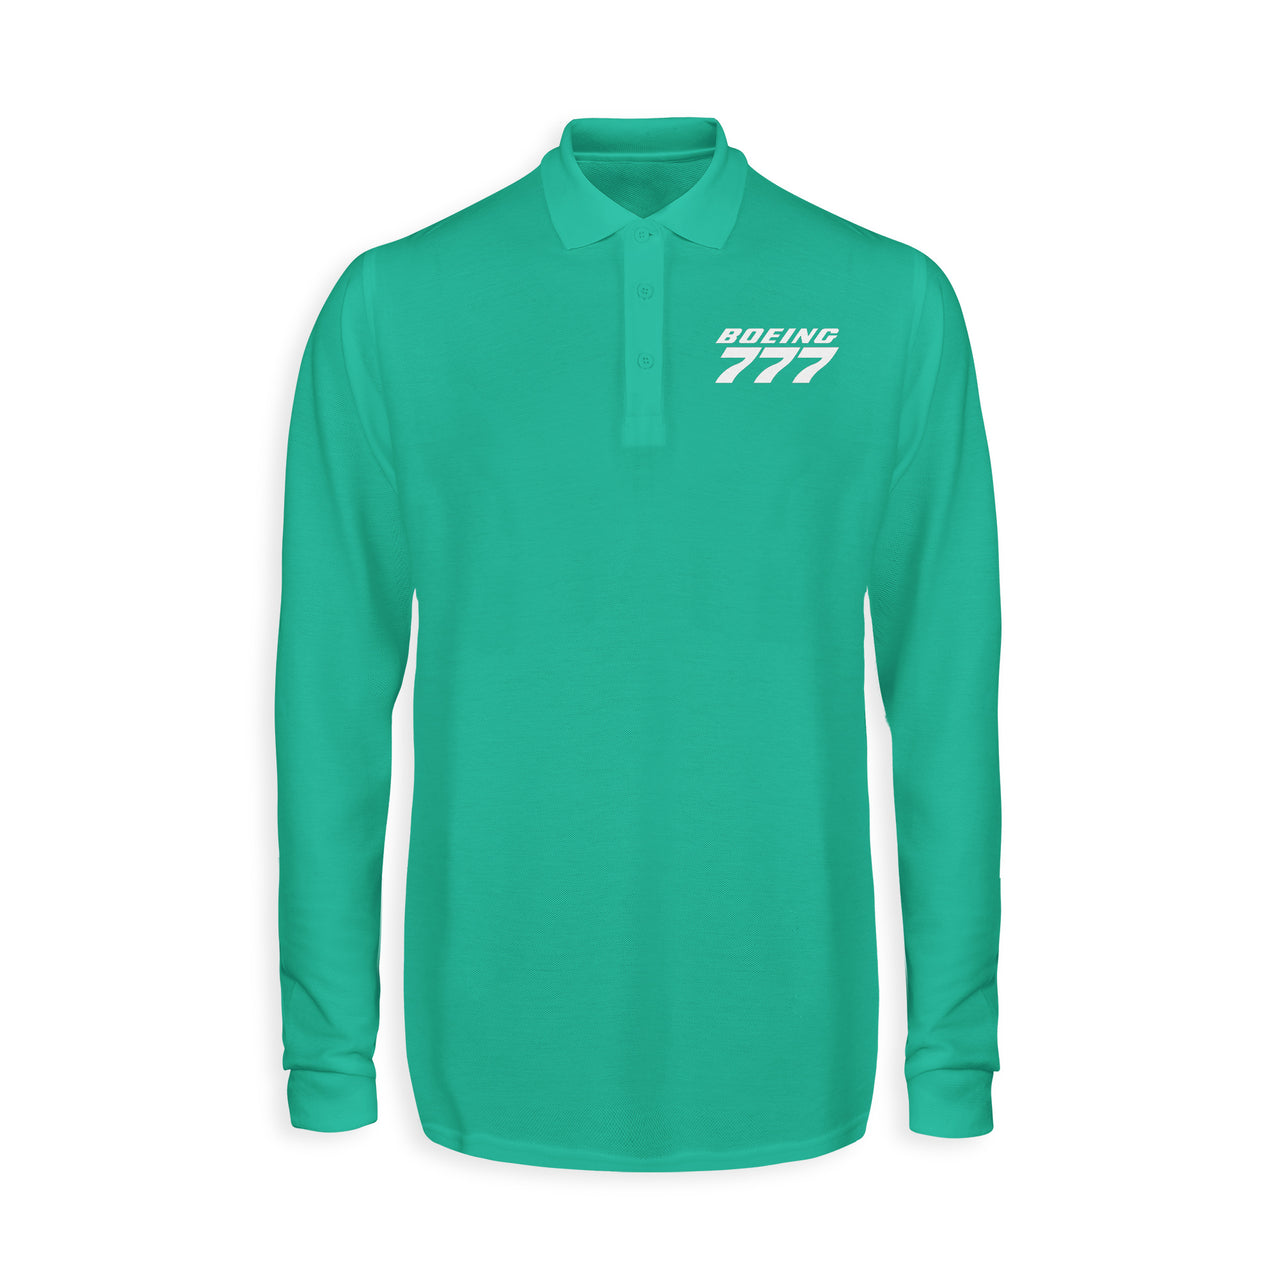 Boeing 777 & Text Designed Long Sleeve Polo T-Shirts